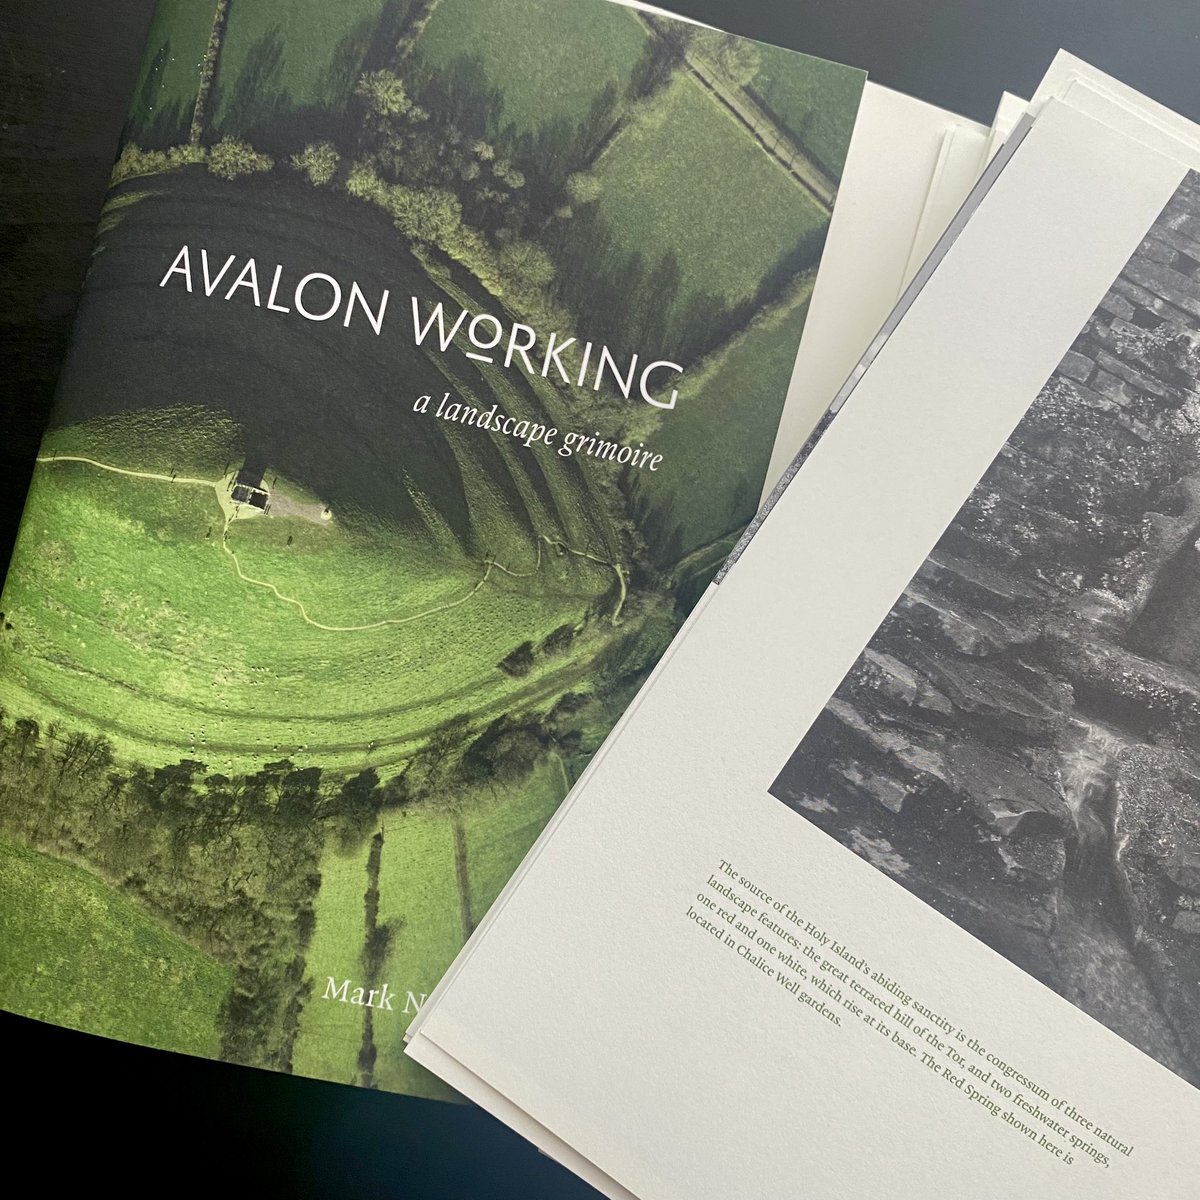 Avalon Working running sheets received today and approved for binding. The finished books should be with us this time next week. We’re excited to share this incredible work by Mark Nemglan with our readers. #scarletimprint #occultbooks #earthmysteries #glastonburytor